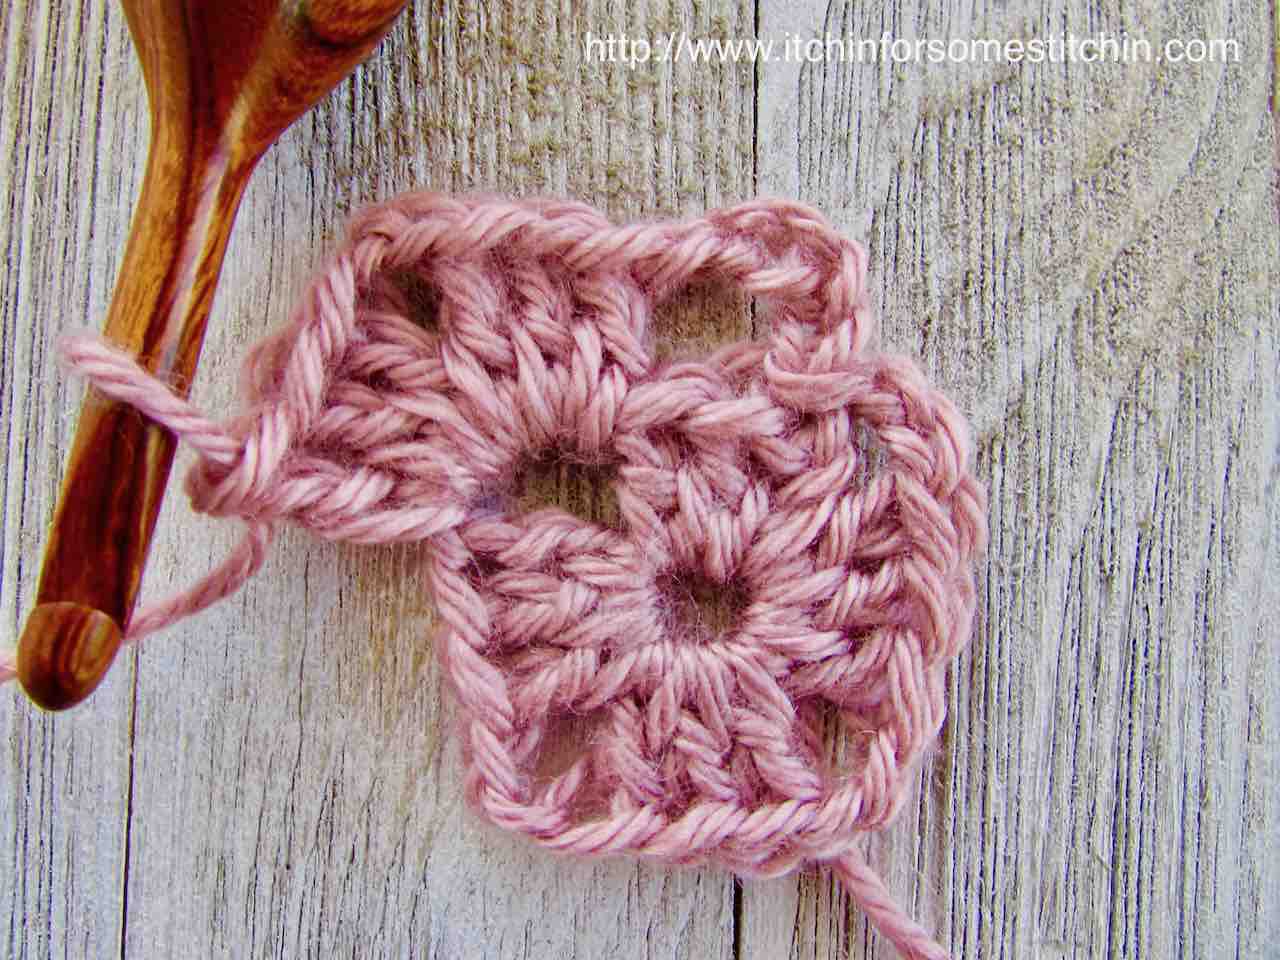 How to Crochet a Basic Granny Square by http://www.itchinforsomestitchin.com